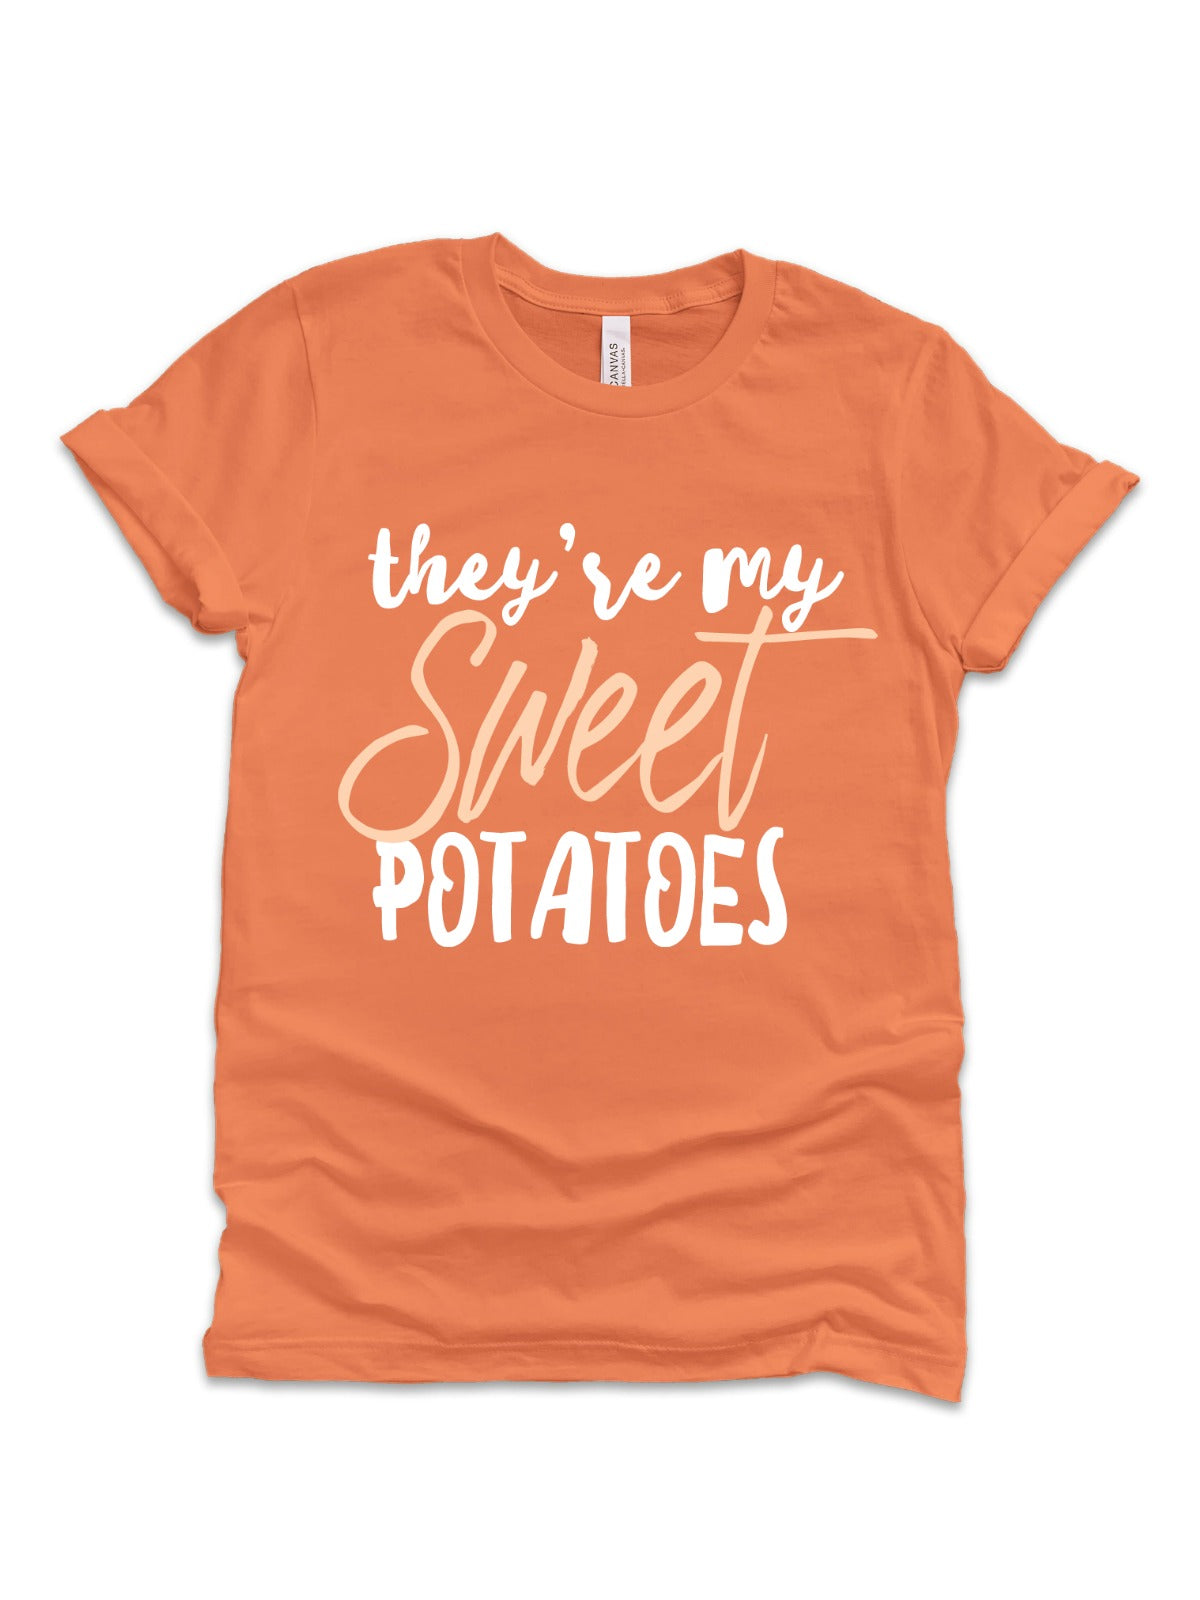 theyre my sweet potatoes adult thanksgiving shirt